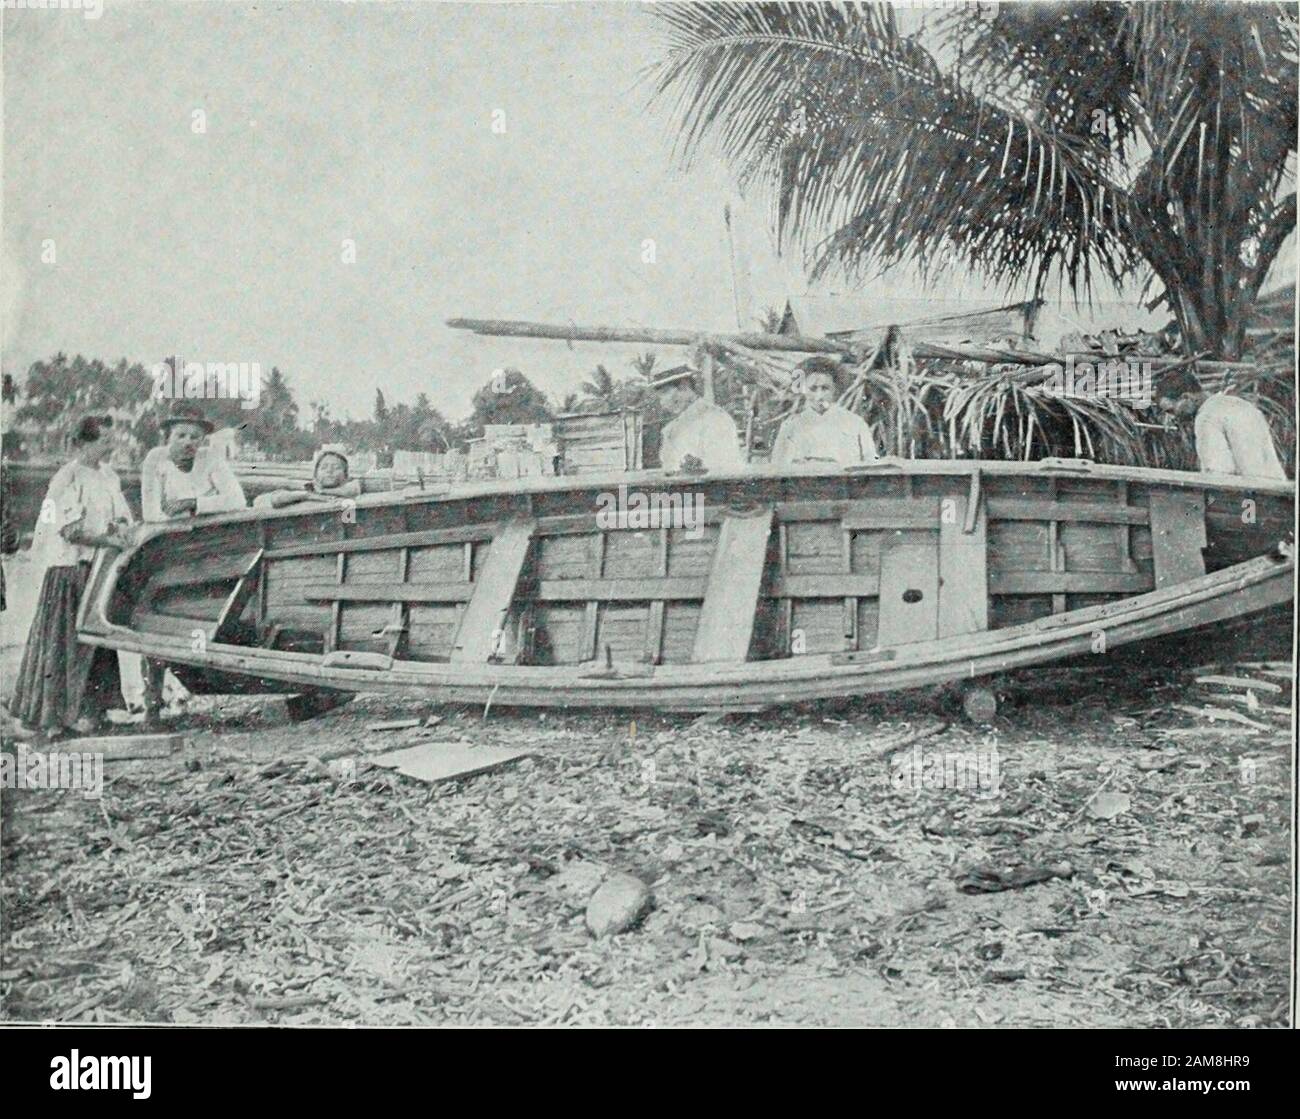 https://c8.alamy.com/comp/2AM8HR9/report-of-the-commissioner-for-the-year-ending-june-30-1899-fish-peddlers-at-porto-real-fishing-boat-at-mayaguez-fisheries-of-porto-rico-15-fresh-fish-business-pishing-for-a-livelihood-is-not-carried-on-to-a-large-extent-anywherein-porto-eico-and-scarcely-at-all-for-sport-a-few-fishermen-at-theseveral-ports-make-a-living-by-fishing-plantation-work-and-labor-atthe-docks-on-vessel-cargoes-the-professional-and-semiprofessional-fishermen-as-noted-by-thewriter-number-nearly-800-and-employ-about-350-sail-and-row-boats-the-local-fisheries-yield-numerous-species-of-fine-edible-fishes-2AM8HR9.jpg